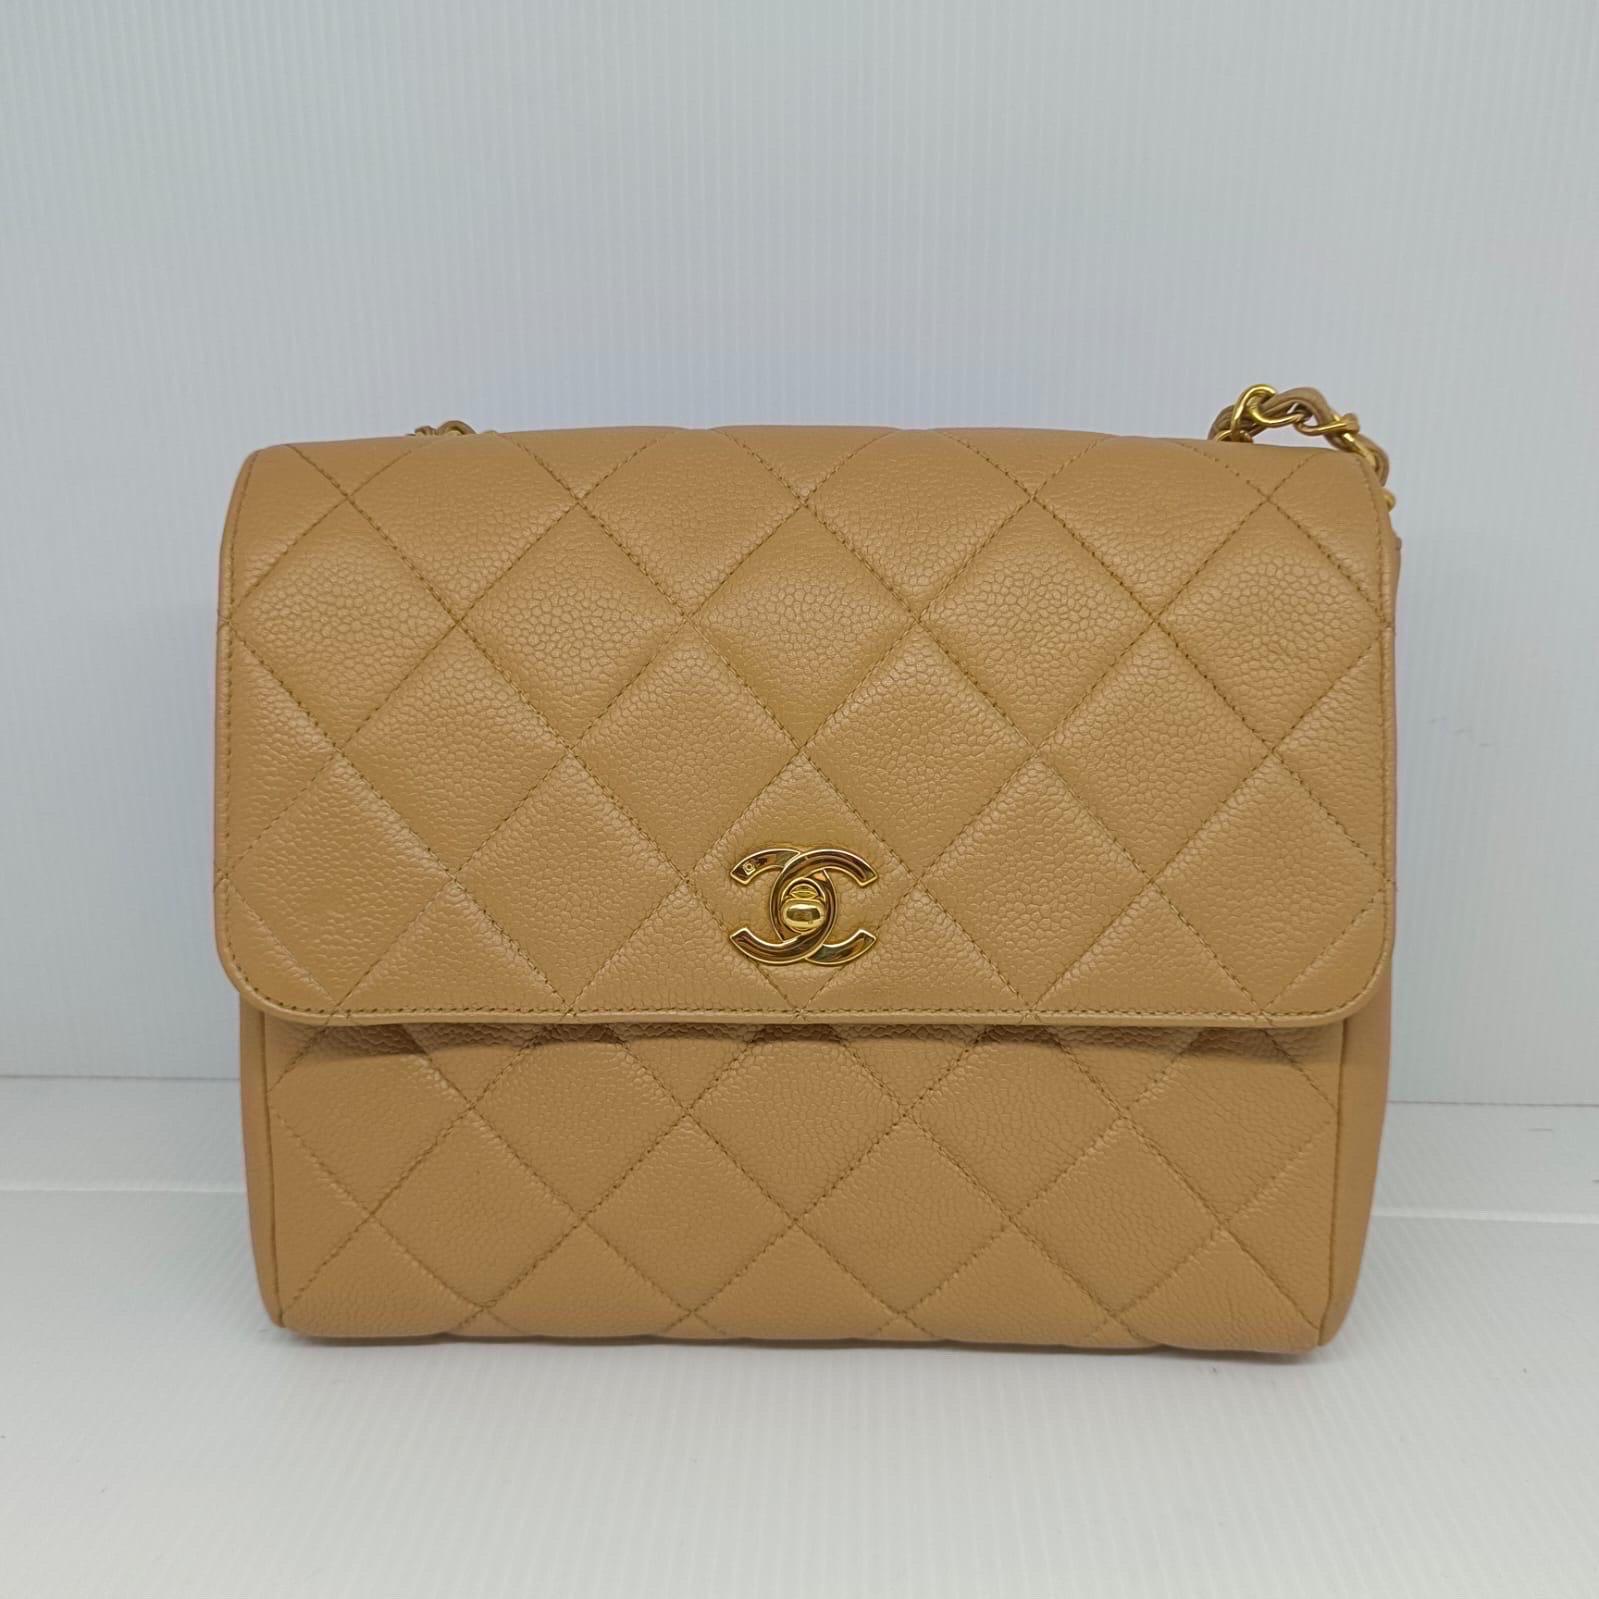 Beautiful vintage chanel flap bag in beige with gold hardware. Series #4. Minor pen mark on the lining and light dark marks on the leather entwined chains. Comes with its holo sticker only. 